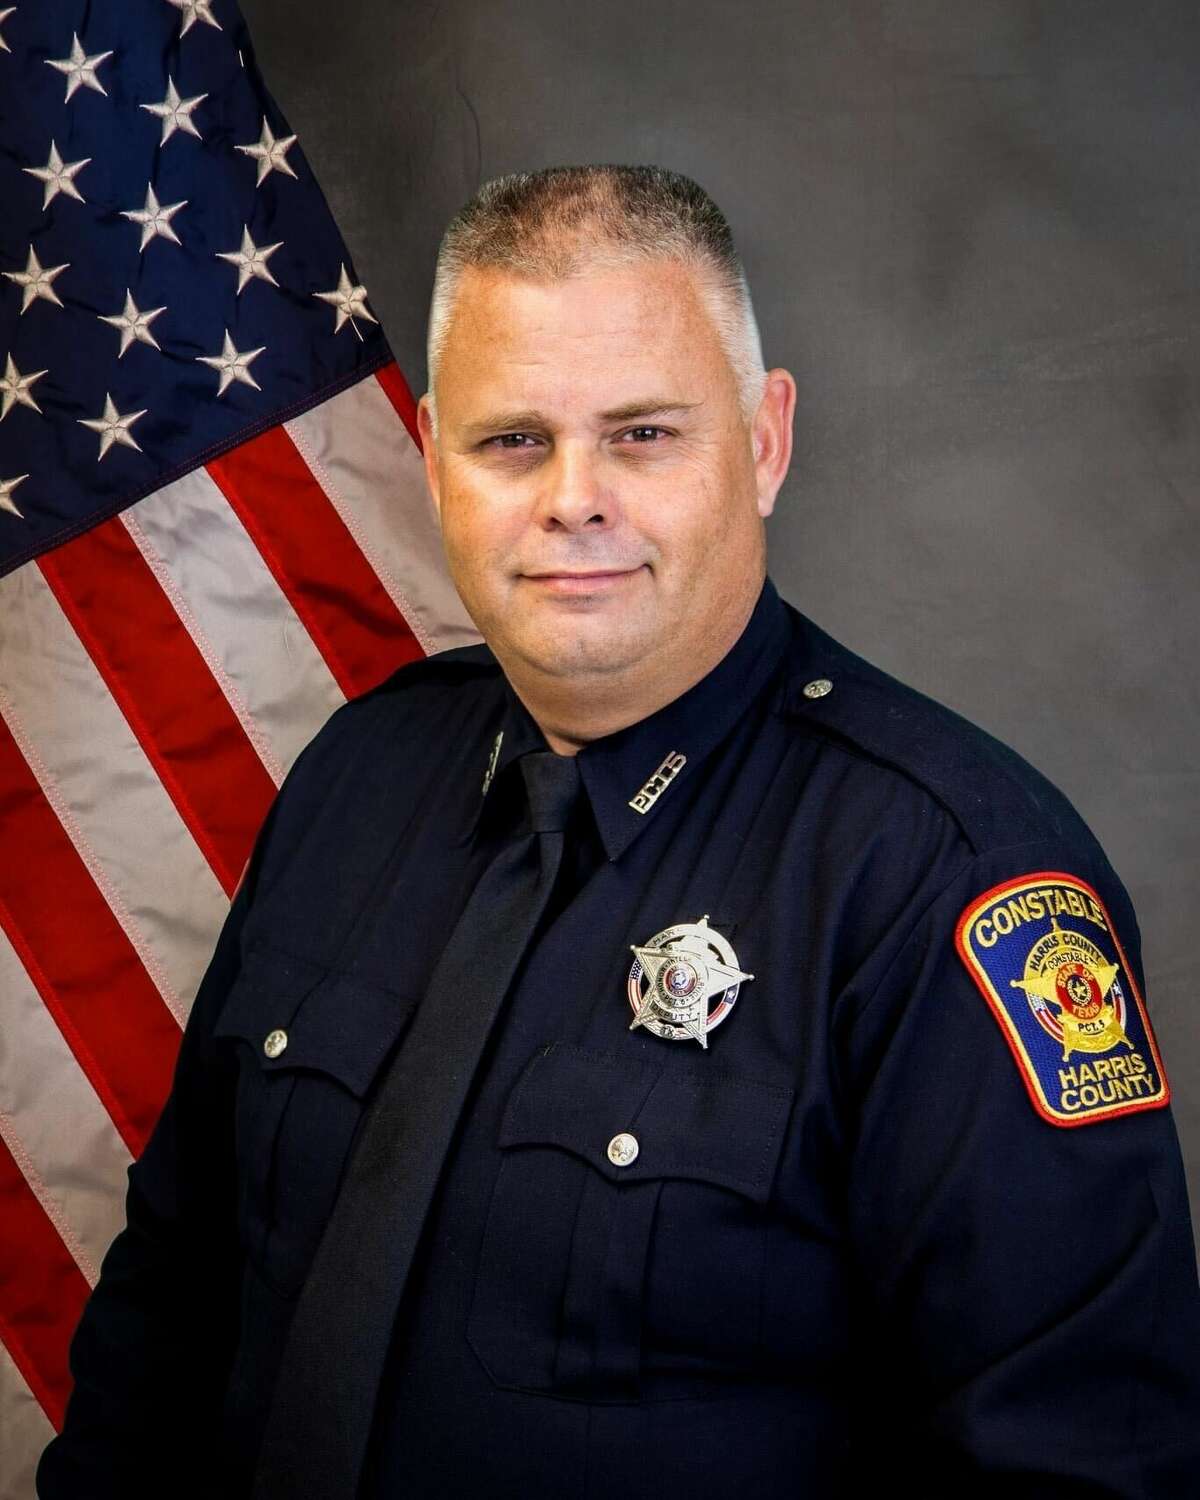 Corporal Charles Galloway, photo is courtesy Harris County Precinct 5 Constable's Office.